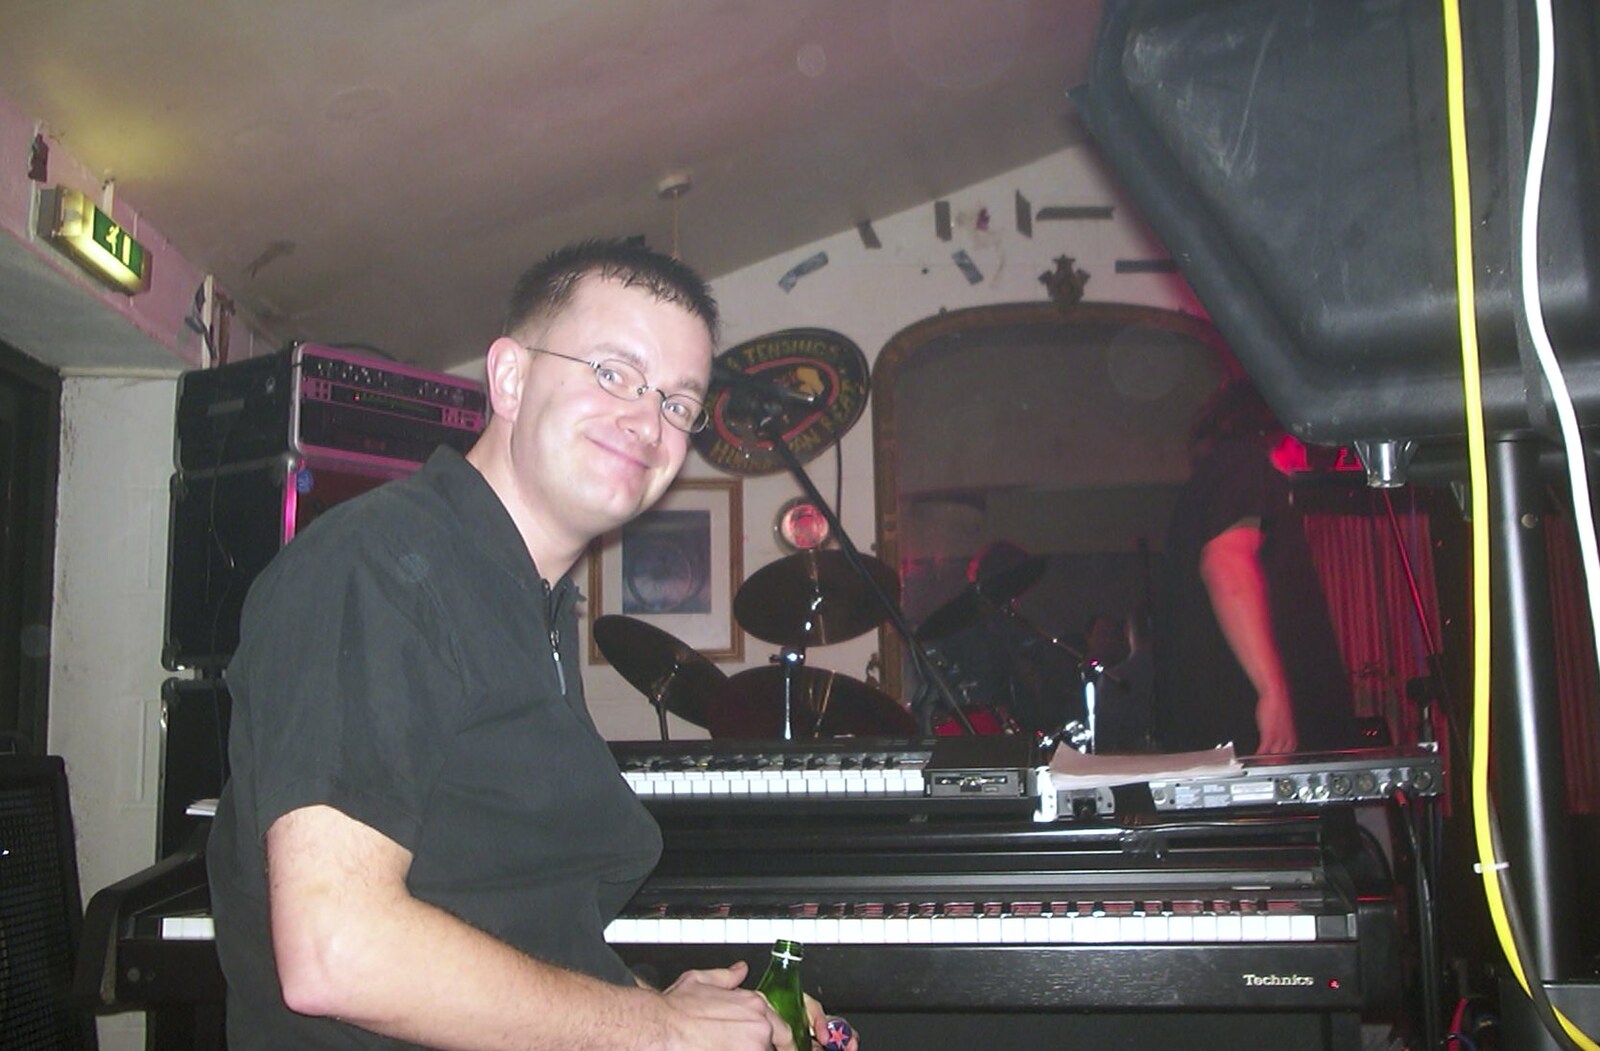 Sitting at the keyboards, waiting for the gig from The BBs at The Cider Shed, Banham, Norfolk - 19th January 2003